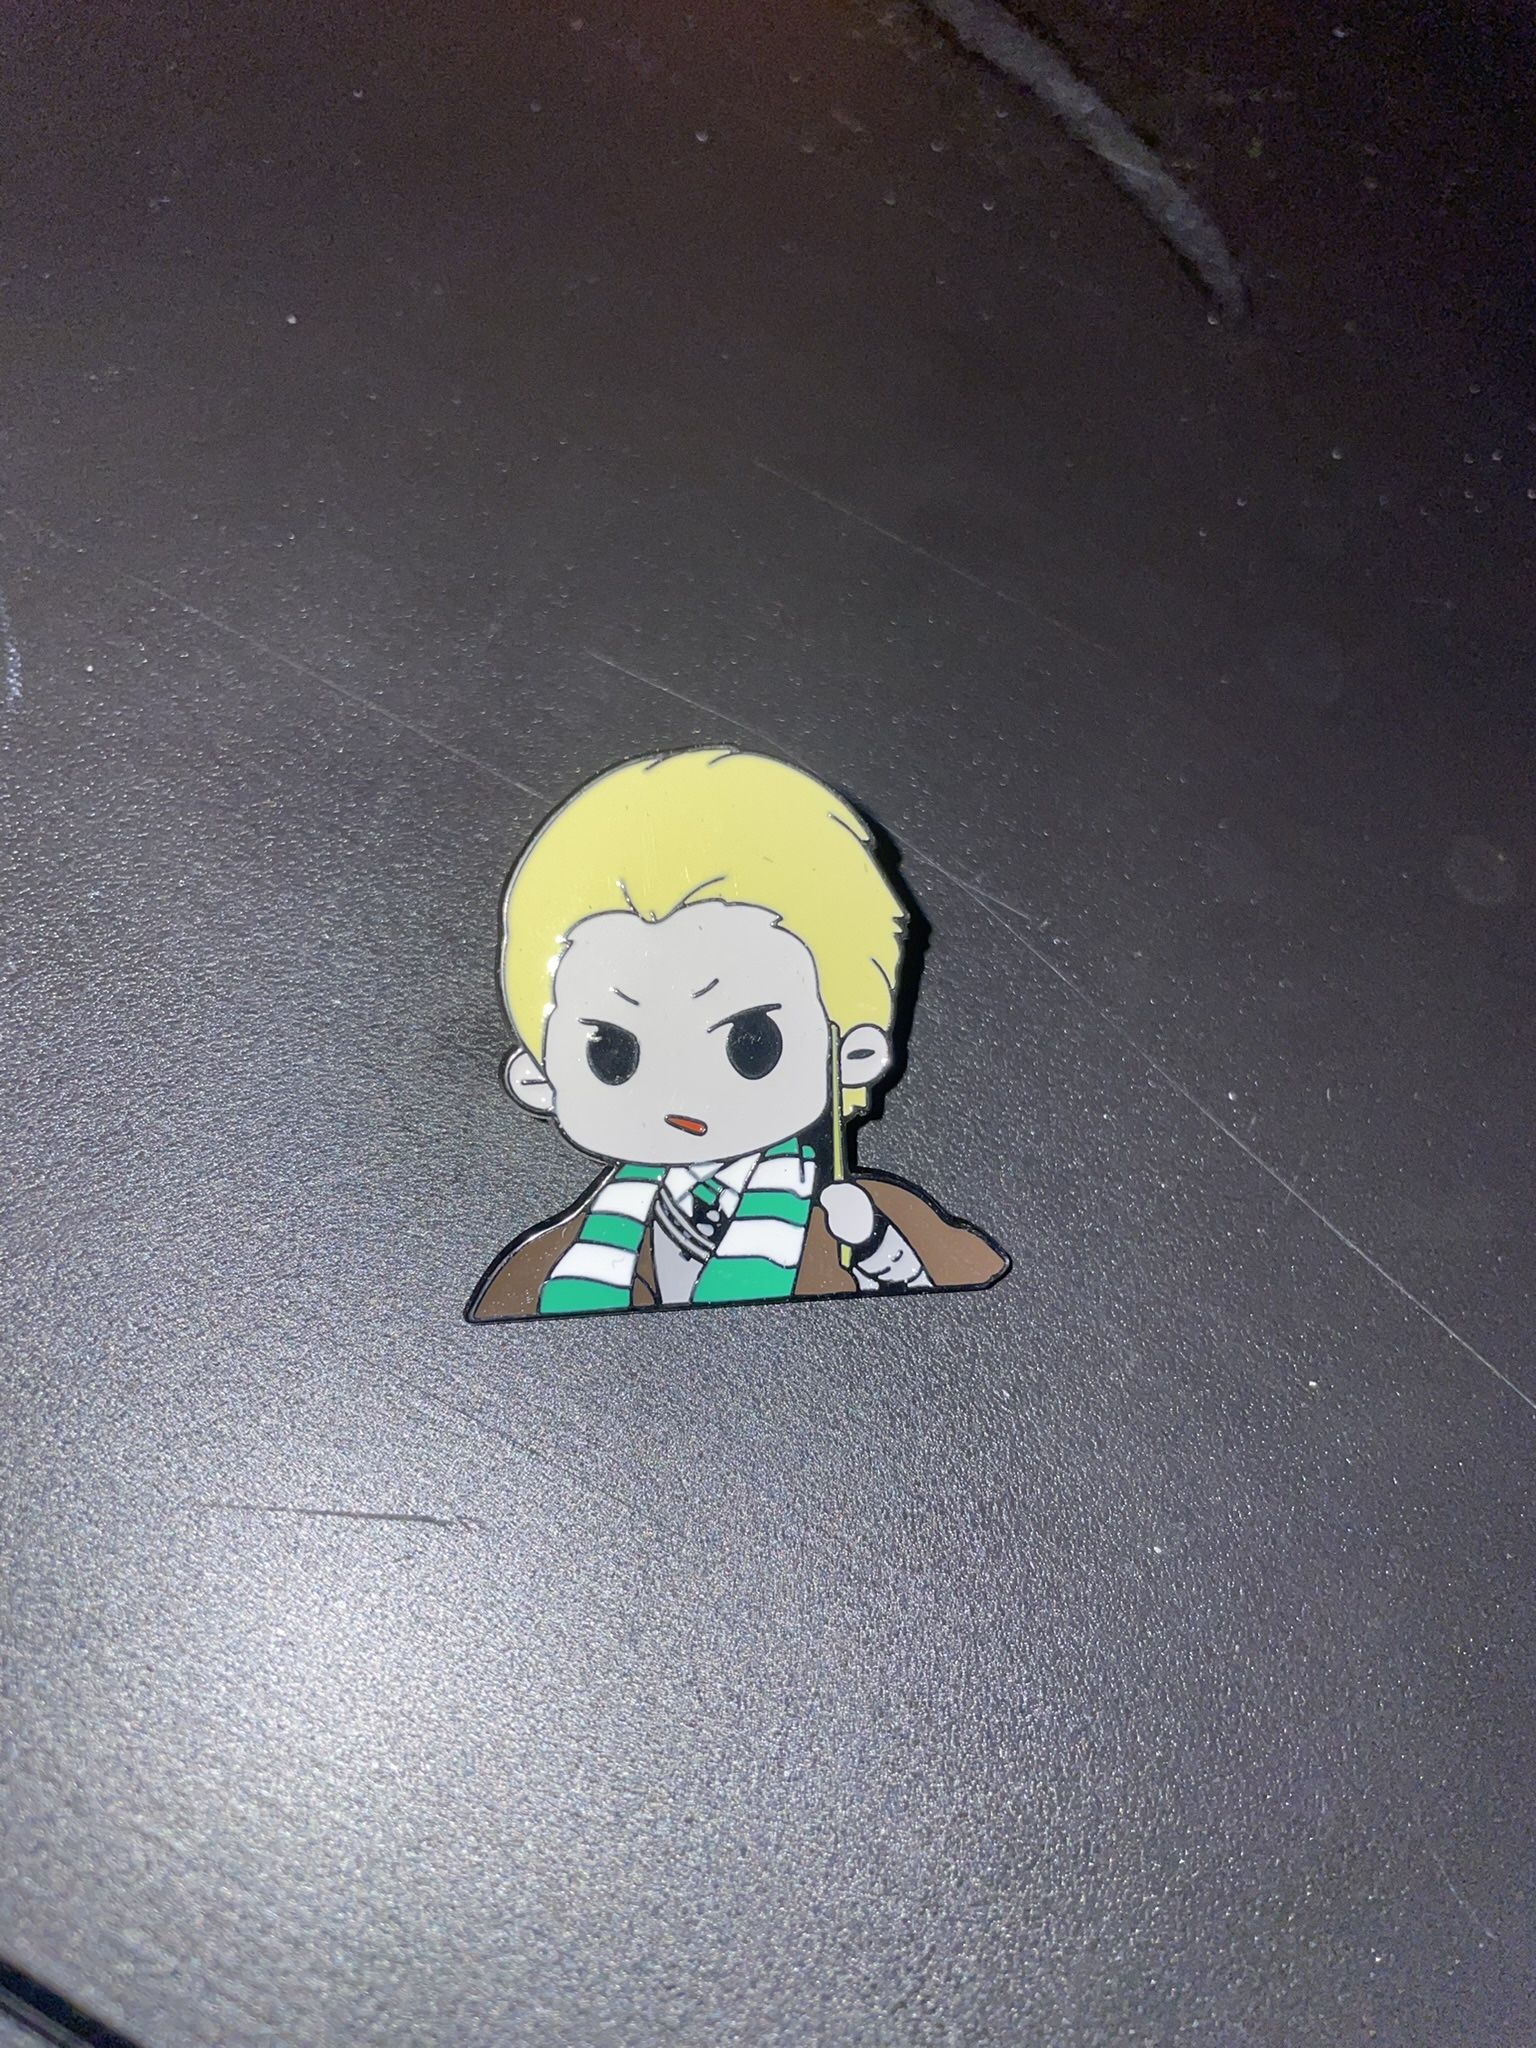 Harry Potter Warner Bros Draco Malfoy Slytherin Pin Collectible Brand New